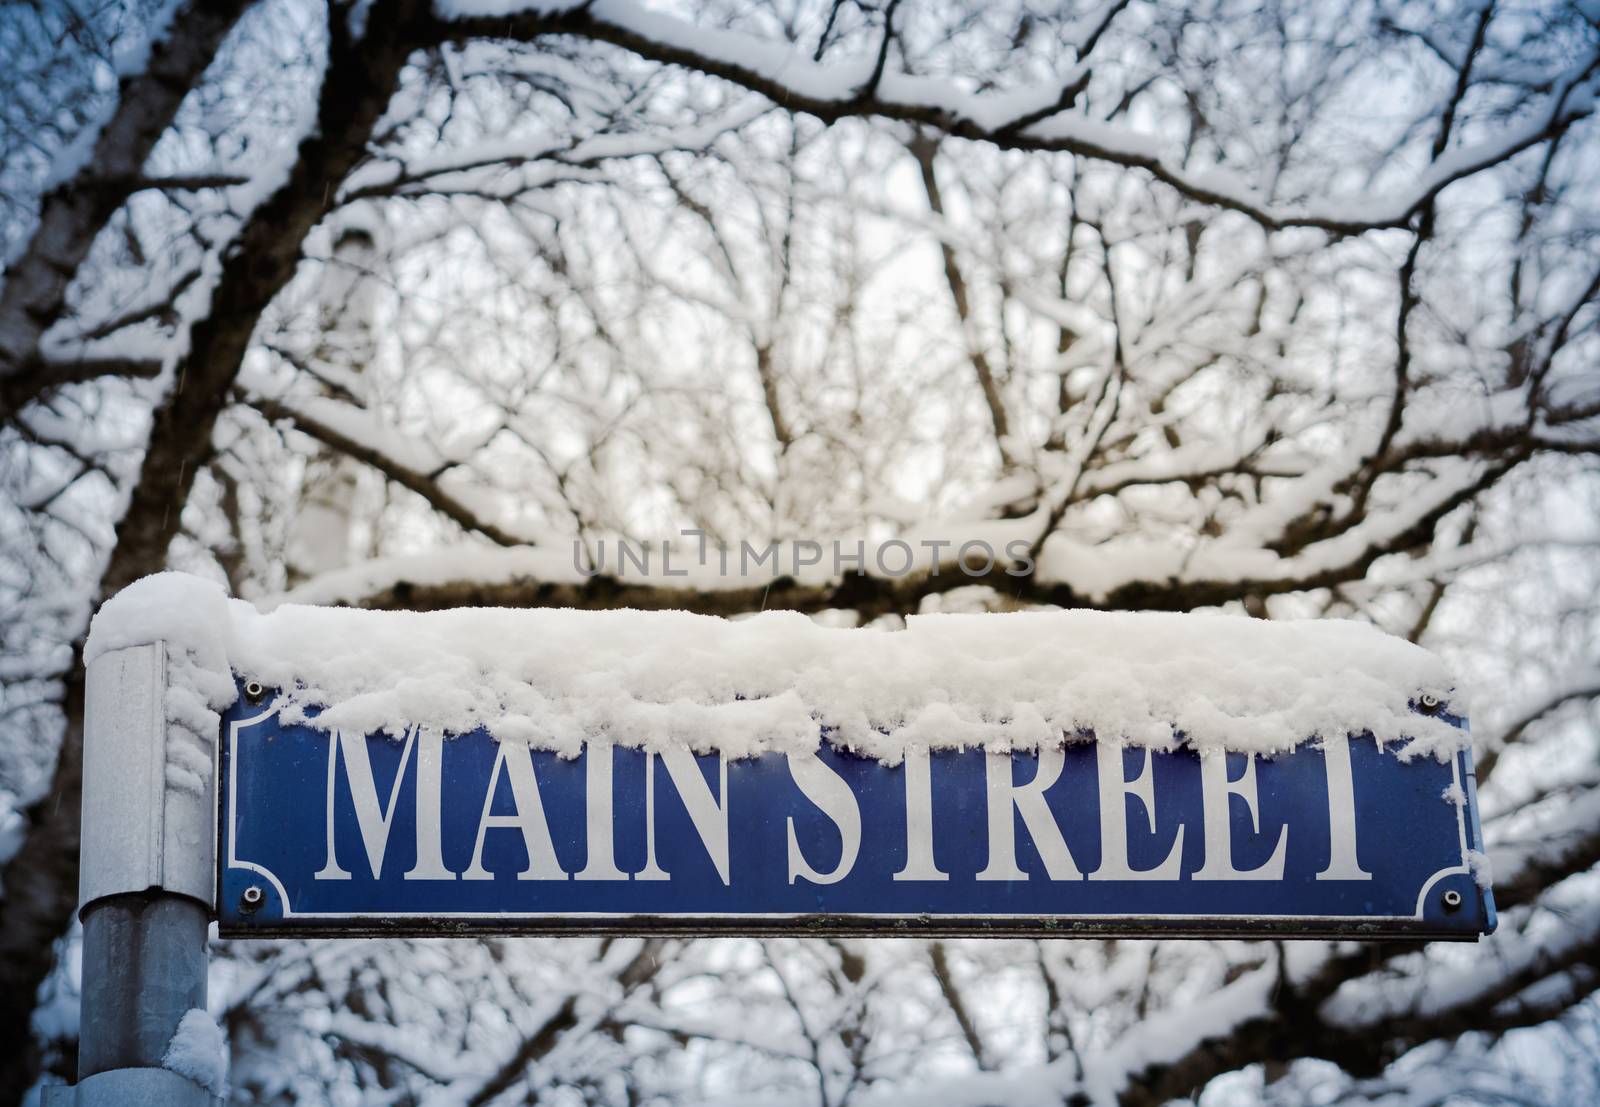 Retro Style Image Of Snow On A Sign For Main Street